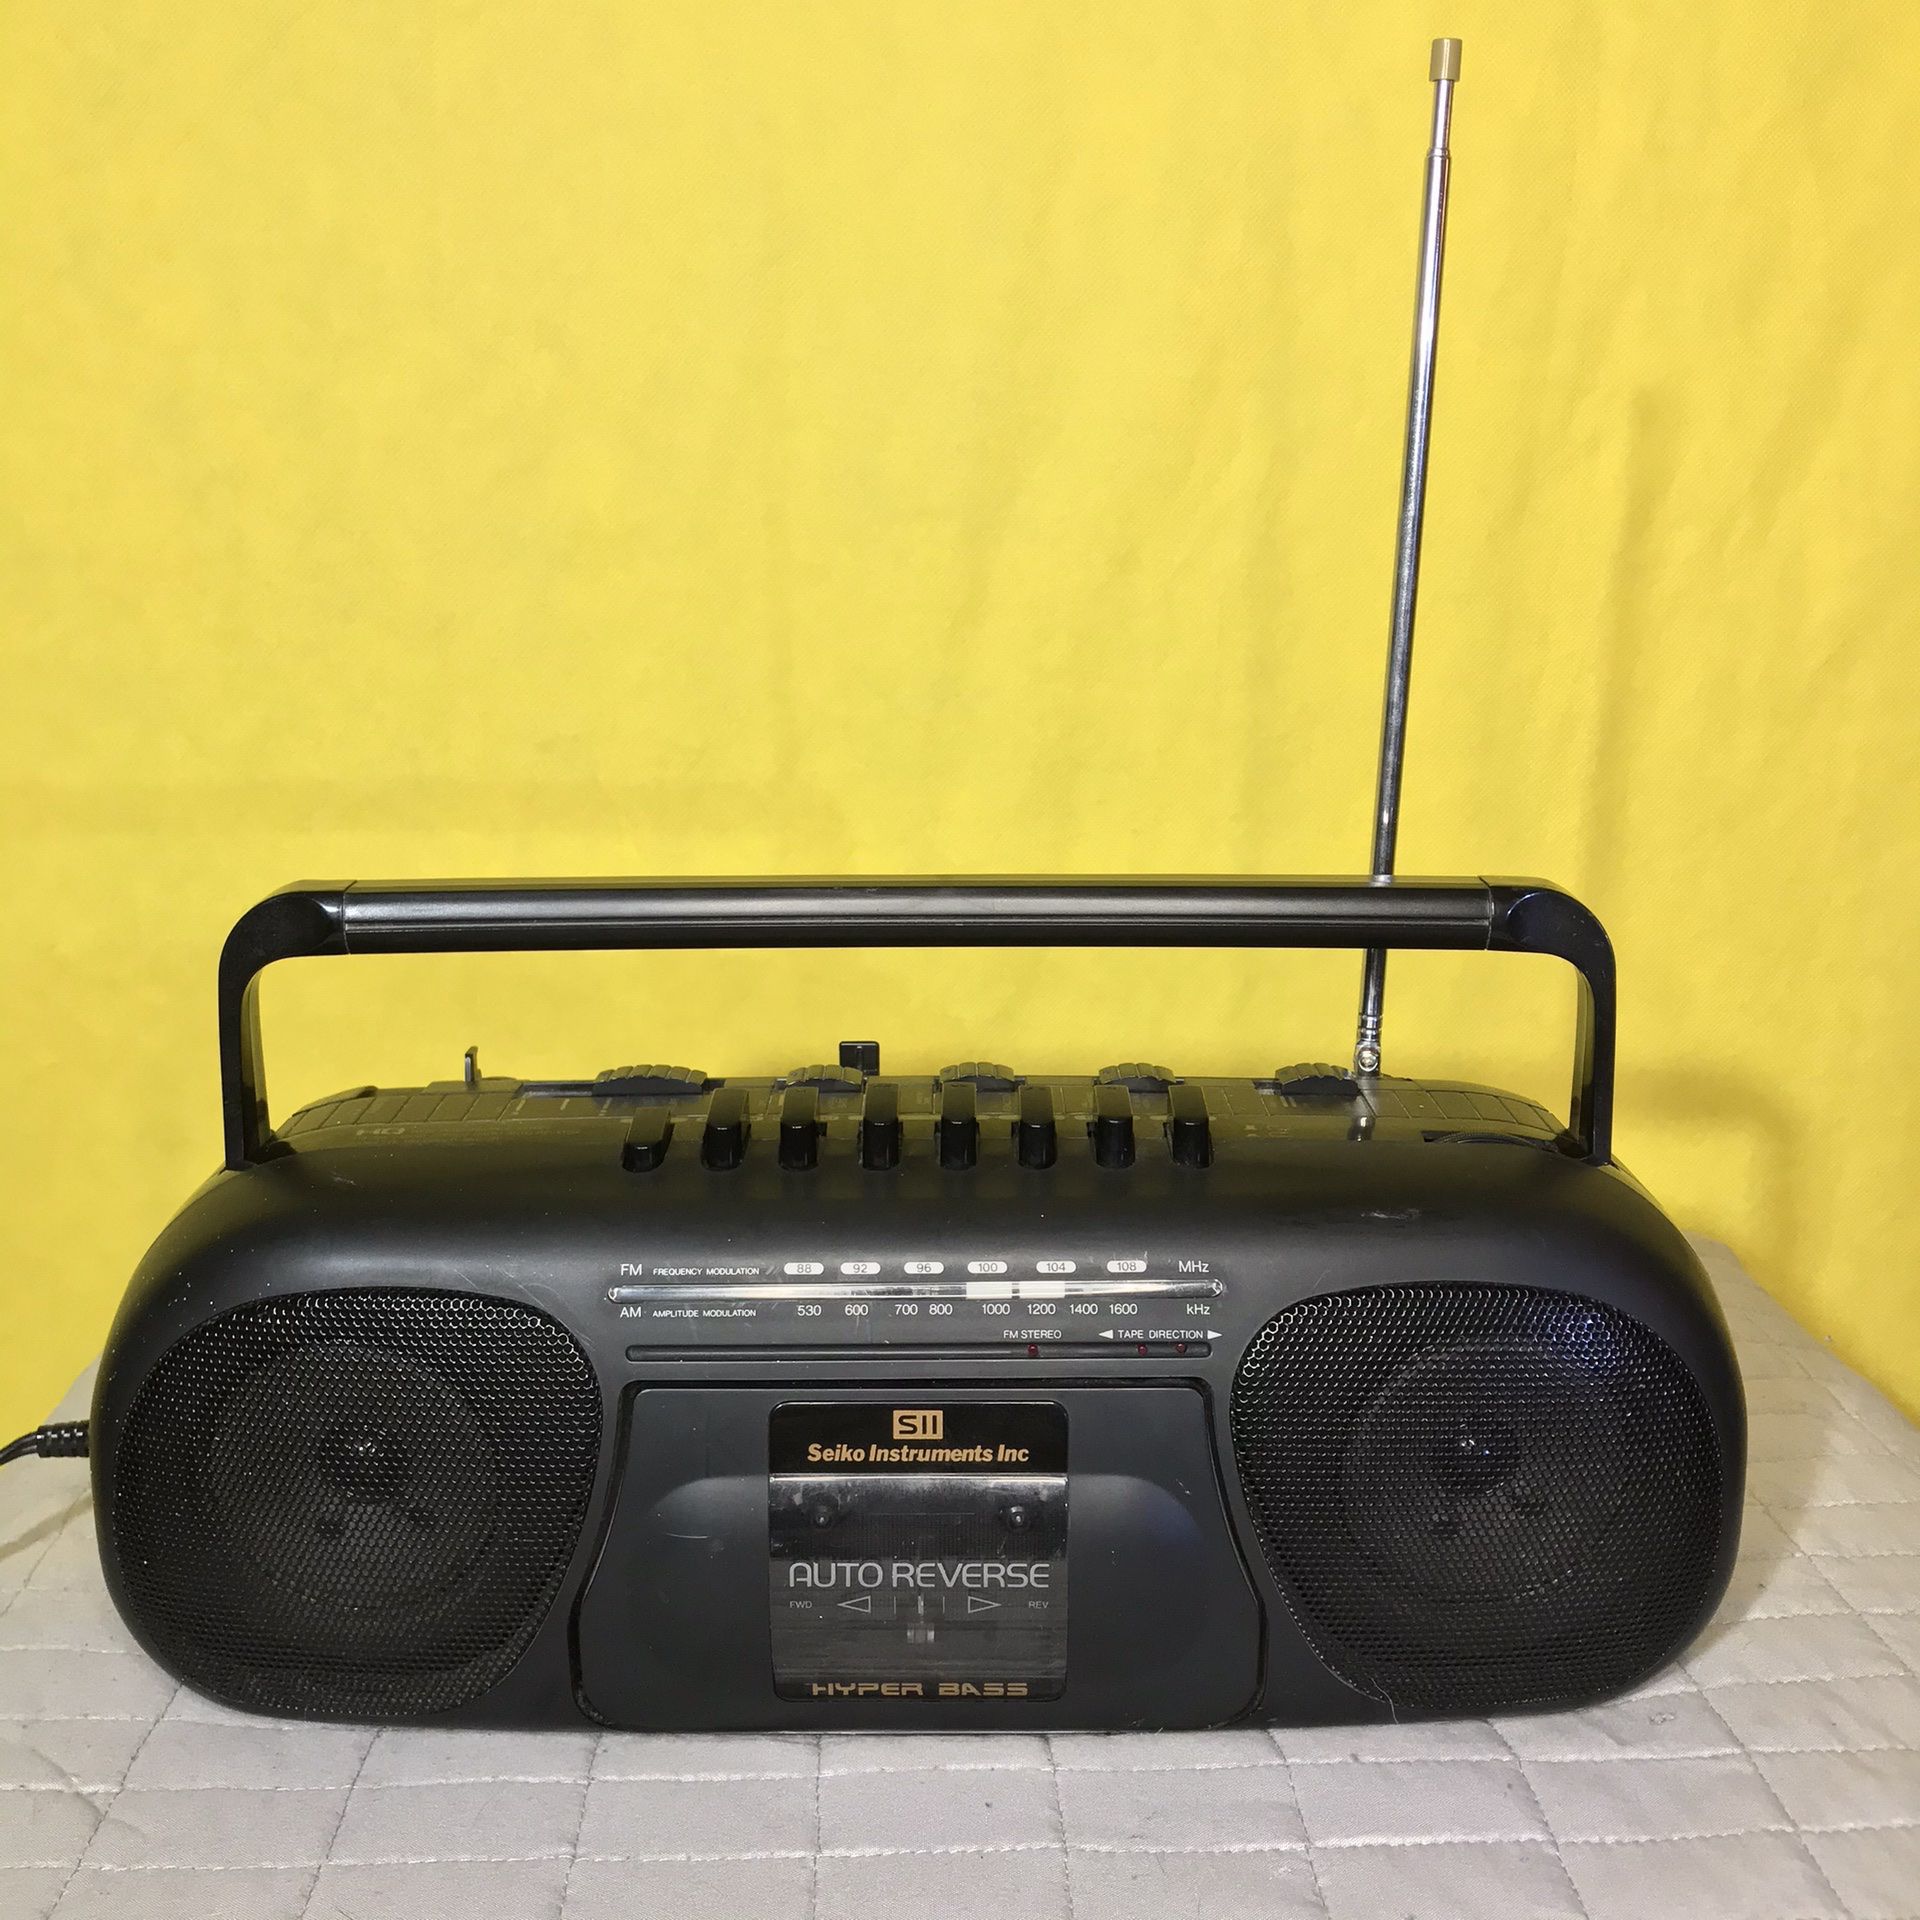 Seiko Instruments Inc. High Performance Series FM / AM 2 Band Stereo Radio  Auto Reverse Cassette Recorder SKC-3RX for Sale in San Marcos, TX - OfferUp